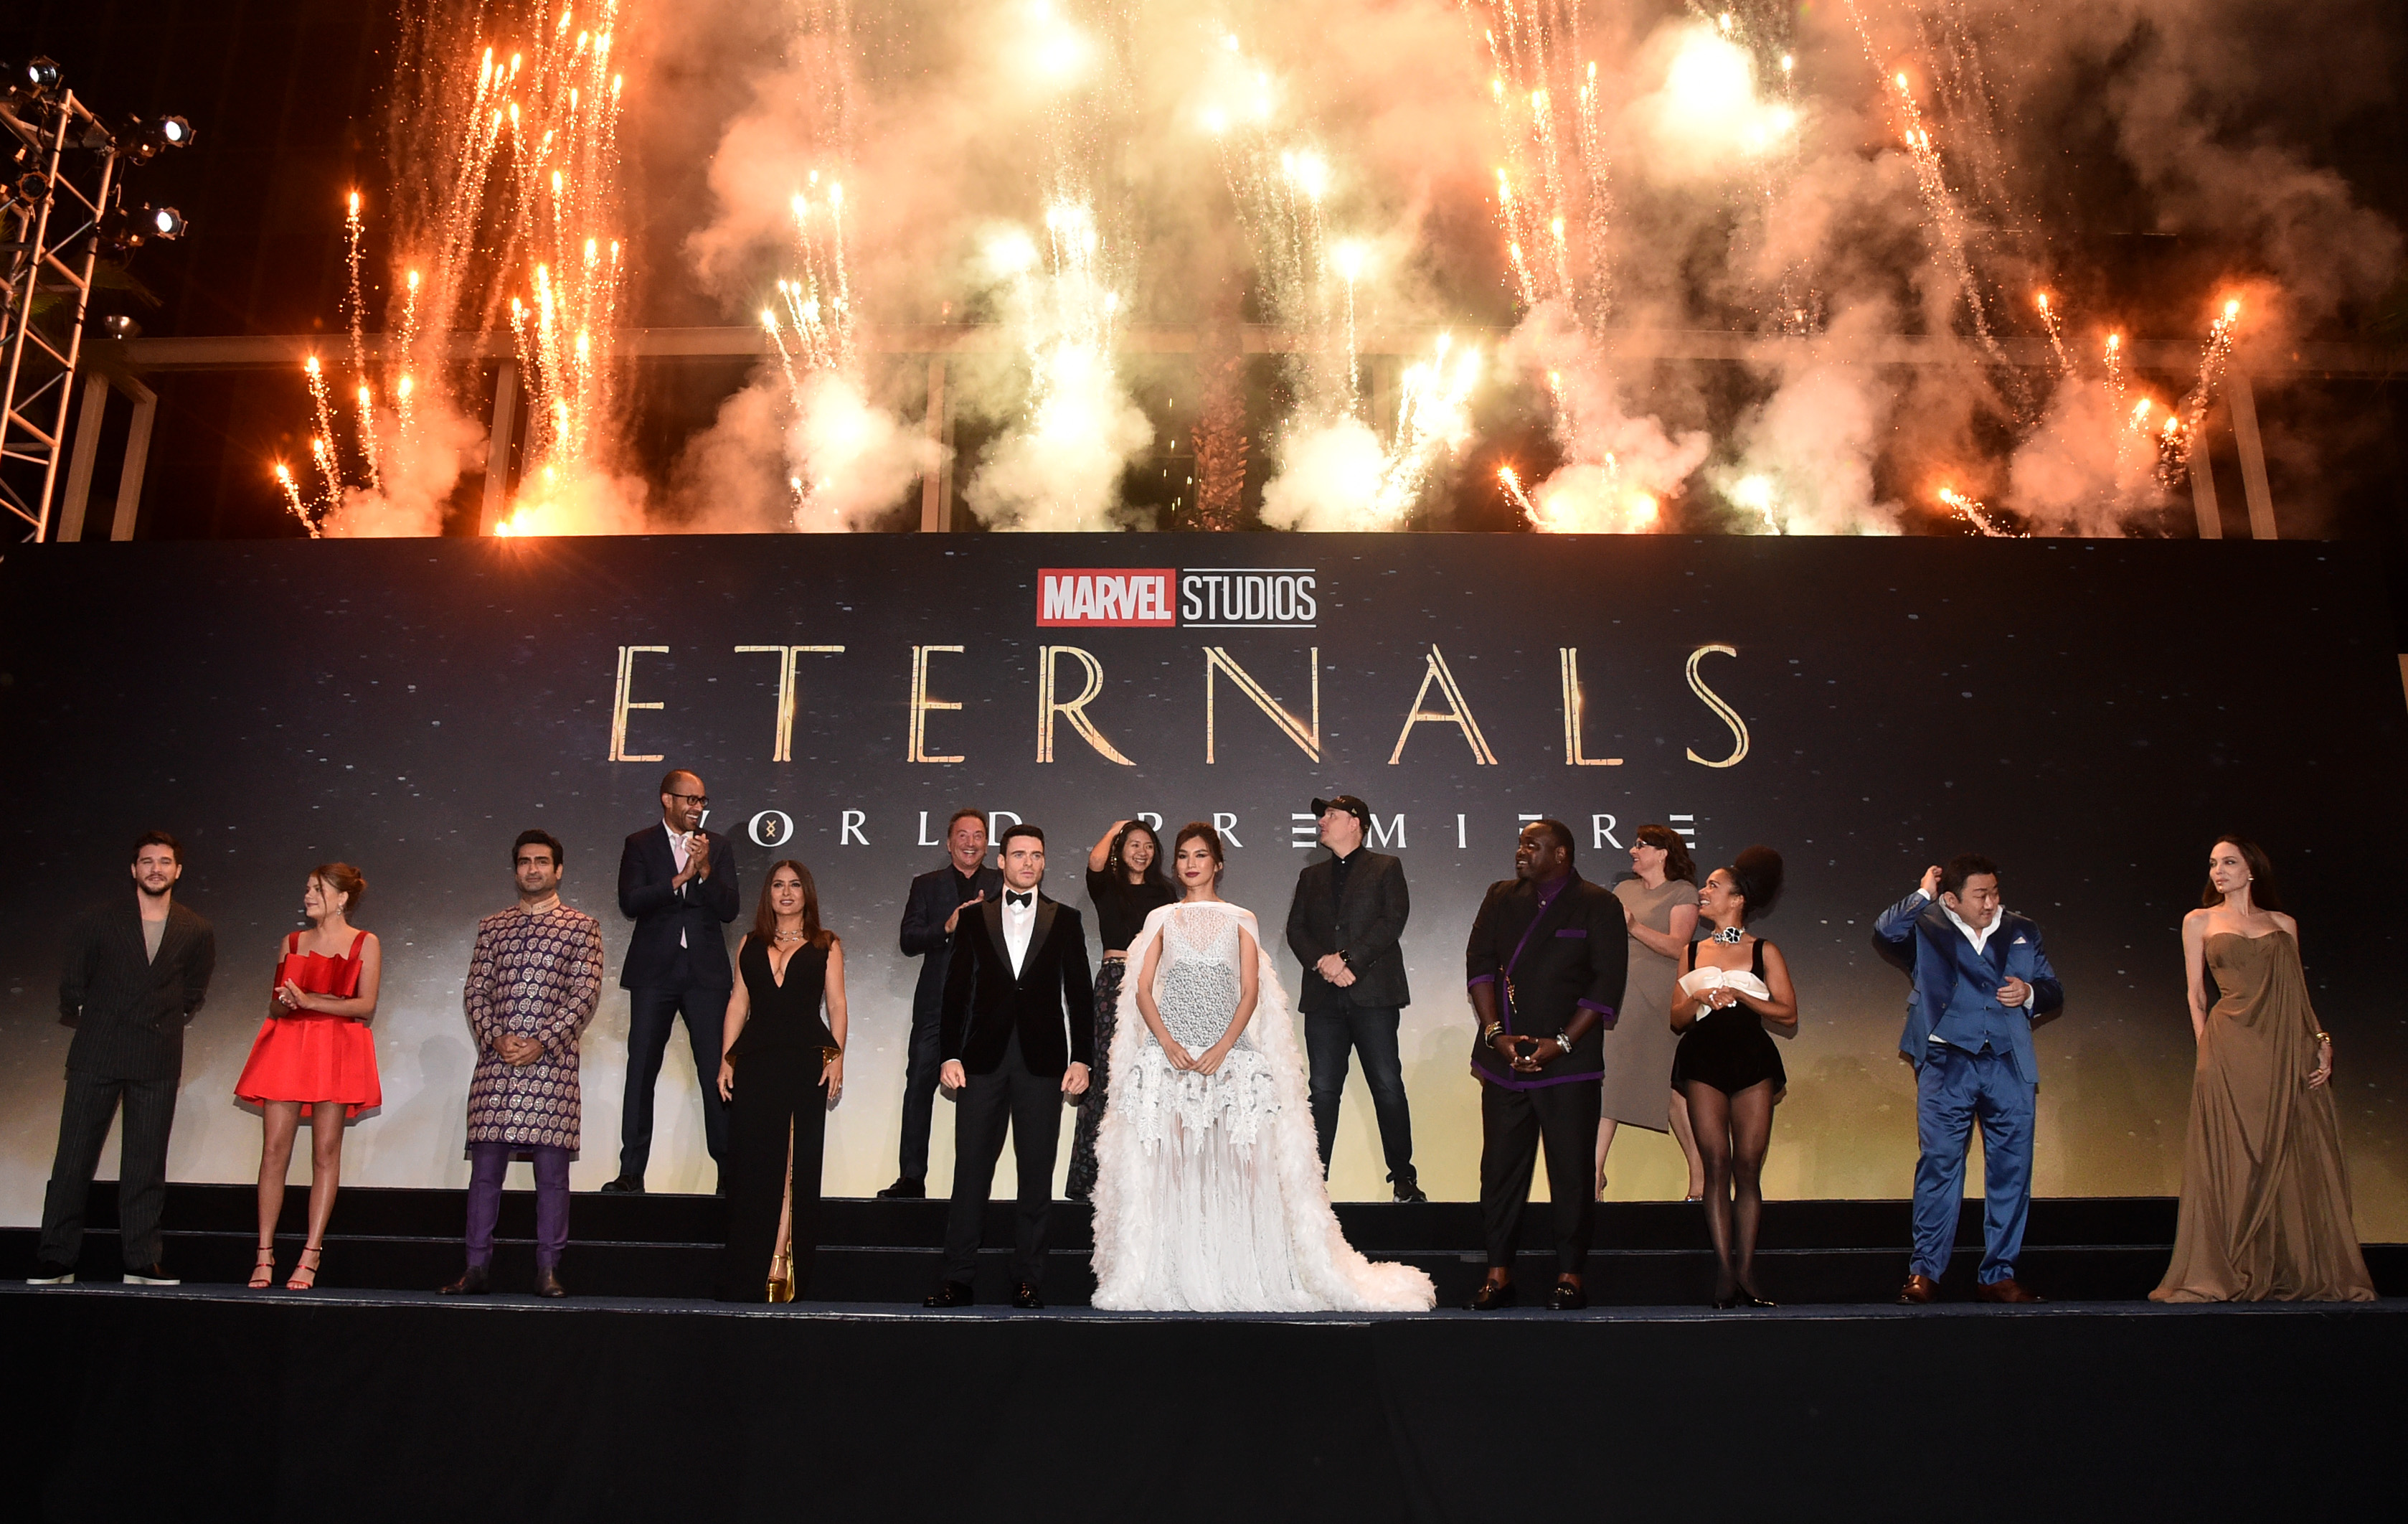 The cast and crew of 'Eternals,' which wasn't nominated at the 2022 Oscars, pose for pictures at the premiere. The people in the photo include Kit Harington, Lia McHugh, Kumail Nanjiani, Nate Moore, Salma Hayek, Louis D'Esposito, Richard Madden, Chloé Zhao, Gemma Chan, Kevin Feige, Brian Tyree Henry, Victoria Alonso, Lauren Ridloff, Don Lee, and Angelina Jolie. They stand in front of a sign for 'Eternals' while fireworks go off behind them.